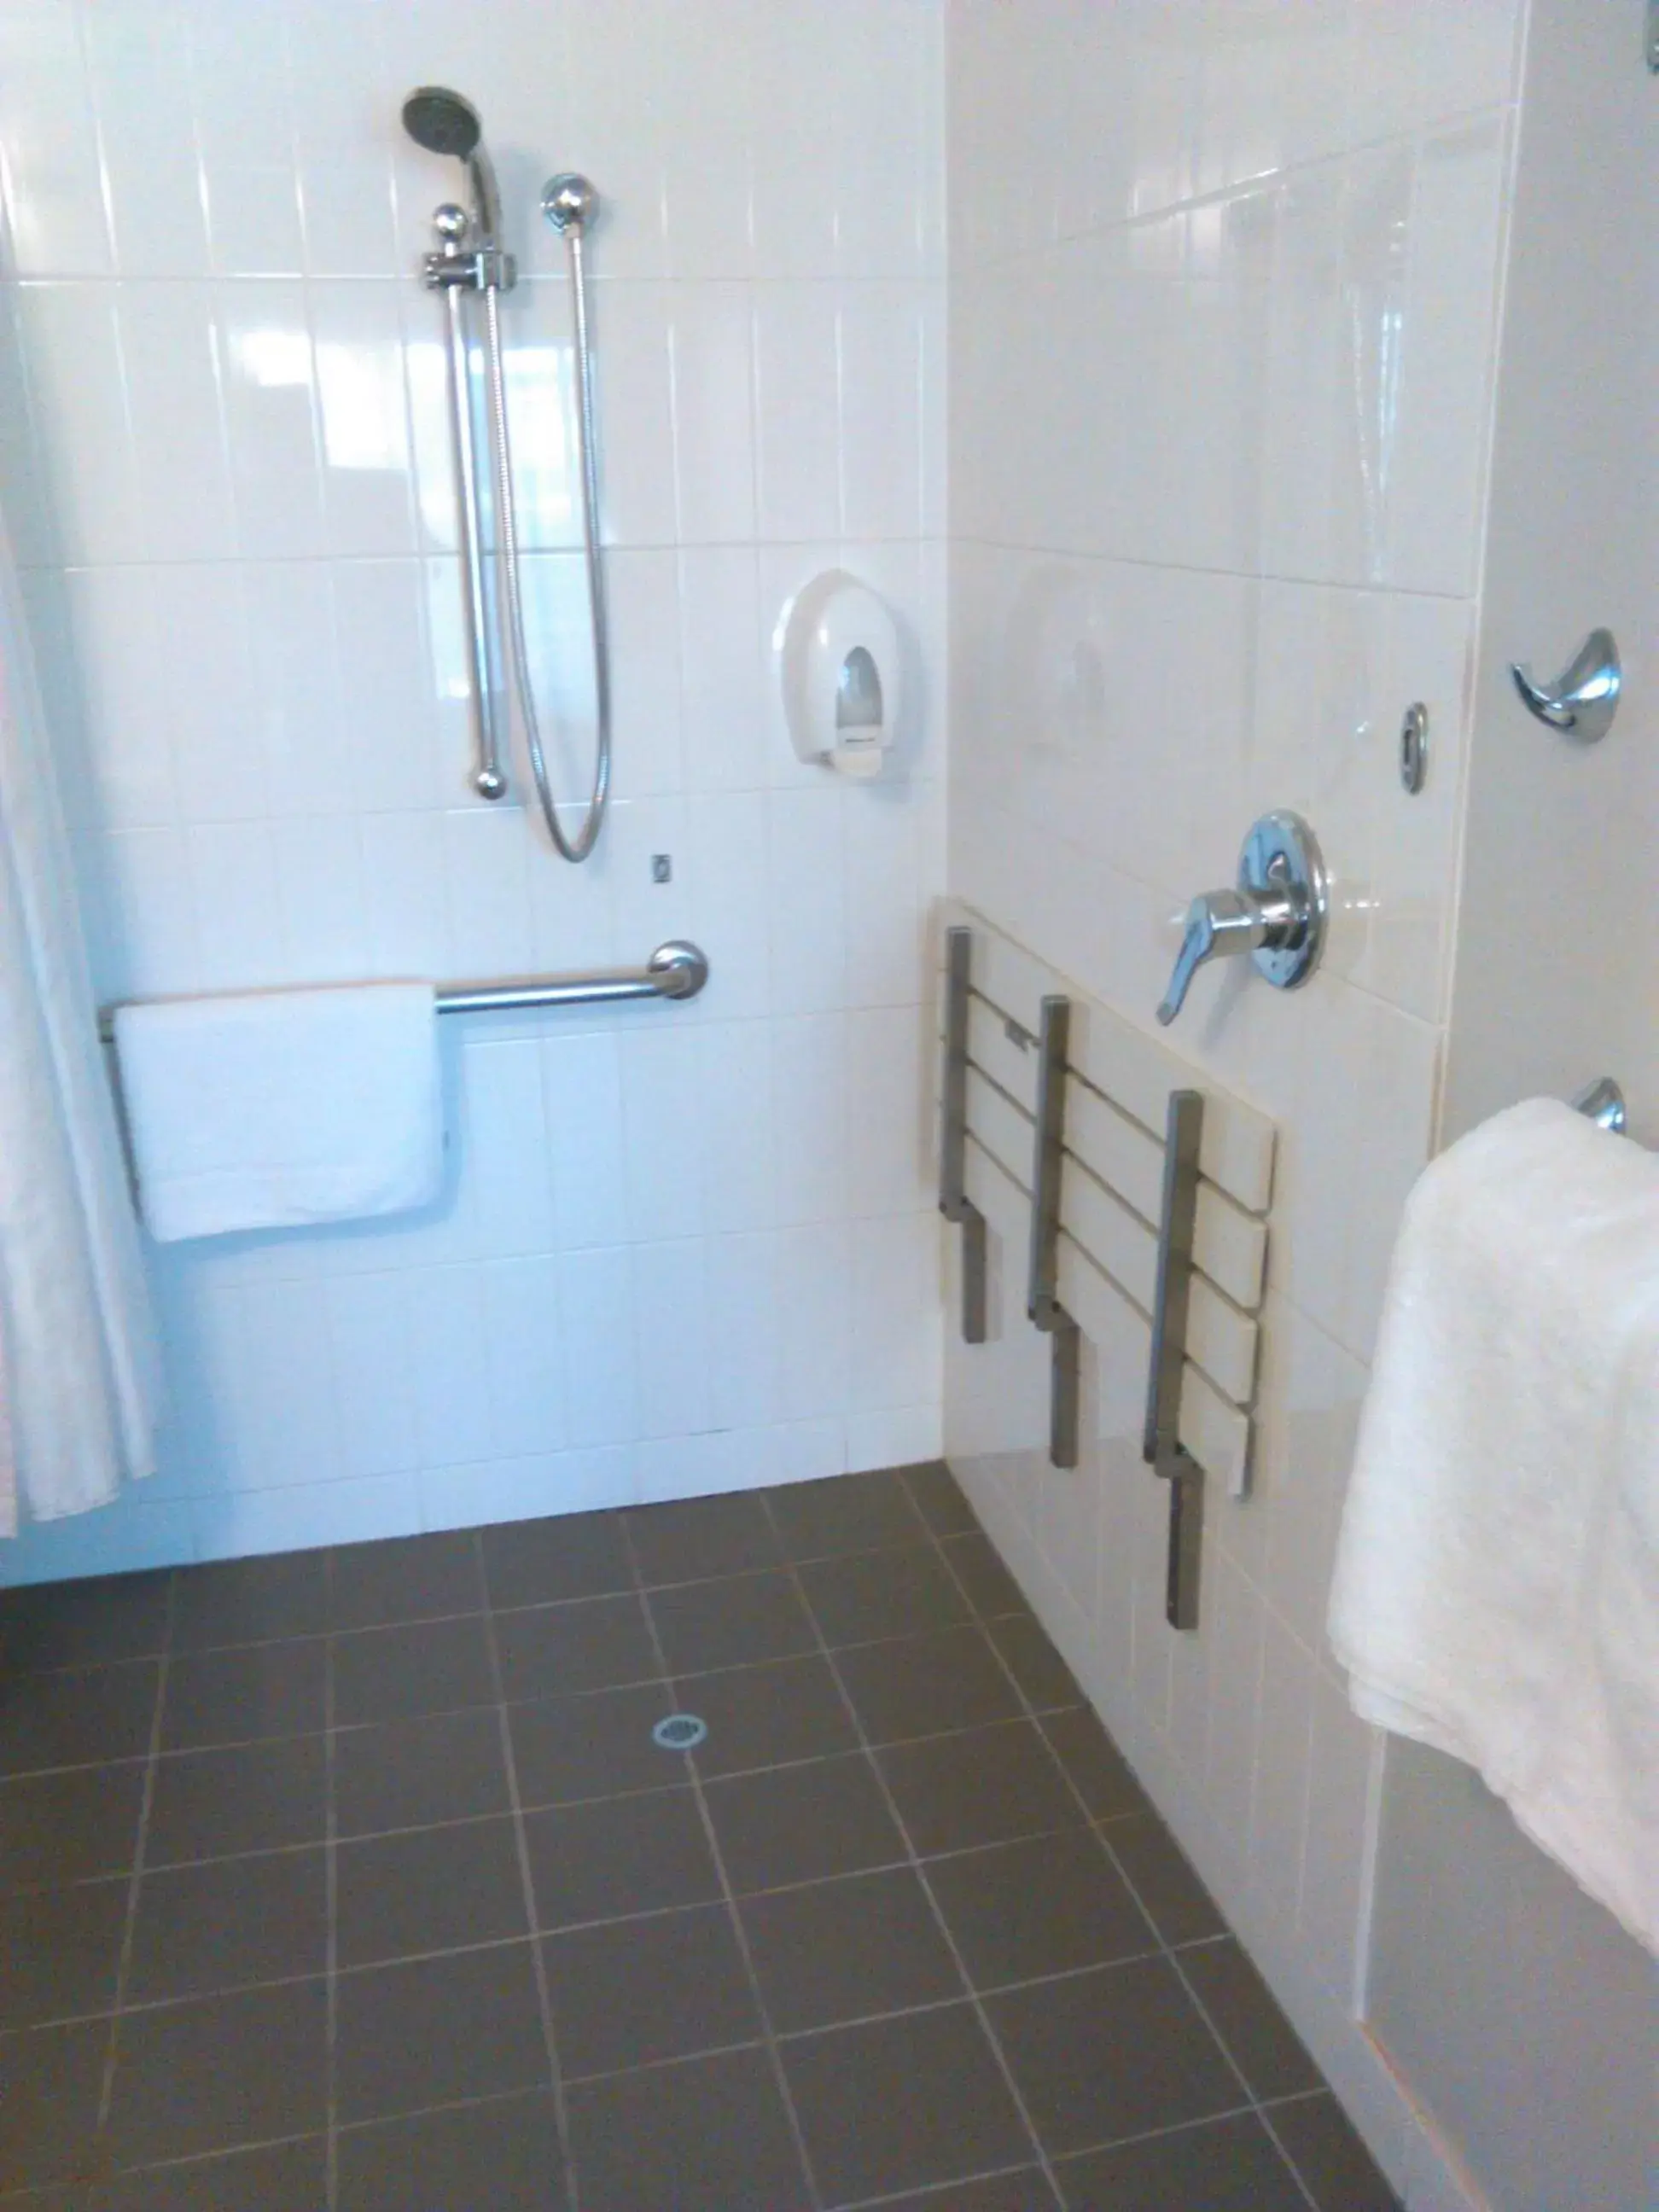 Shower, Bathroom in Manly Marina Cove Motel